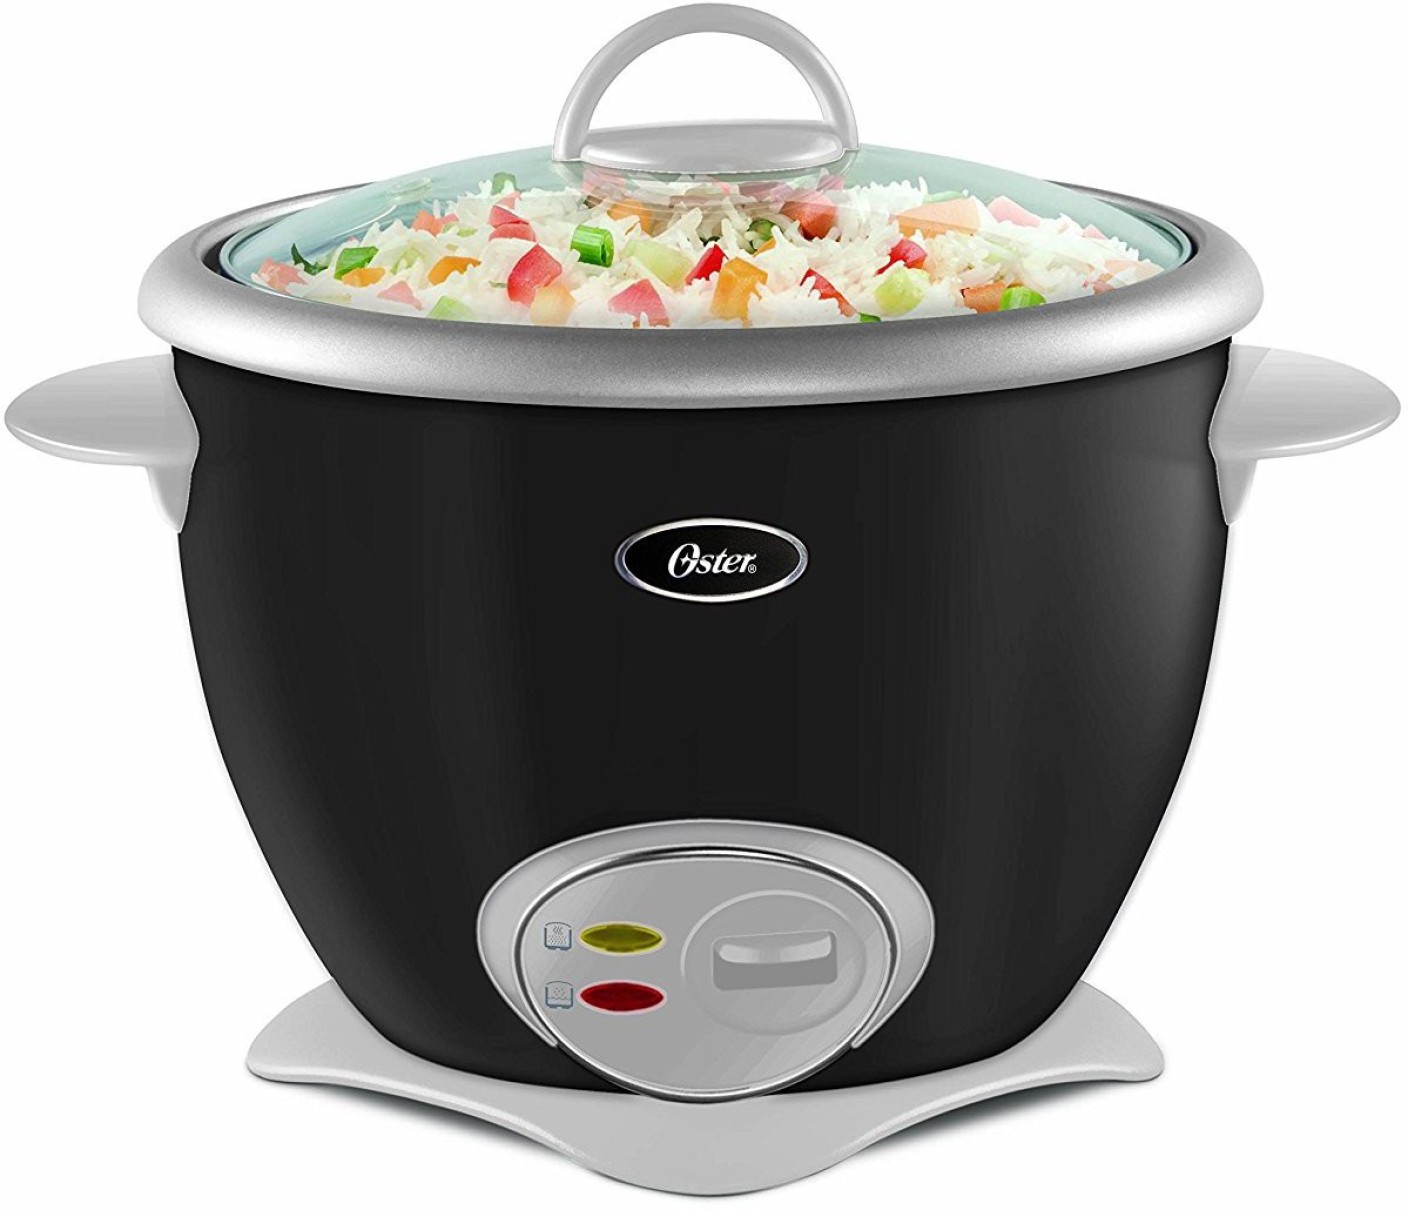 Oster 4728 Electric Rice Cooker Price in India - Buy Oster 4728 ...